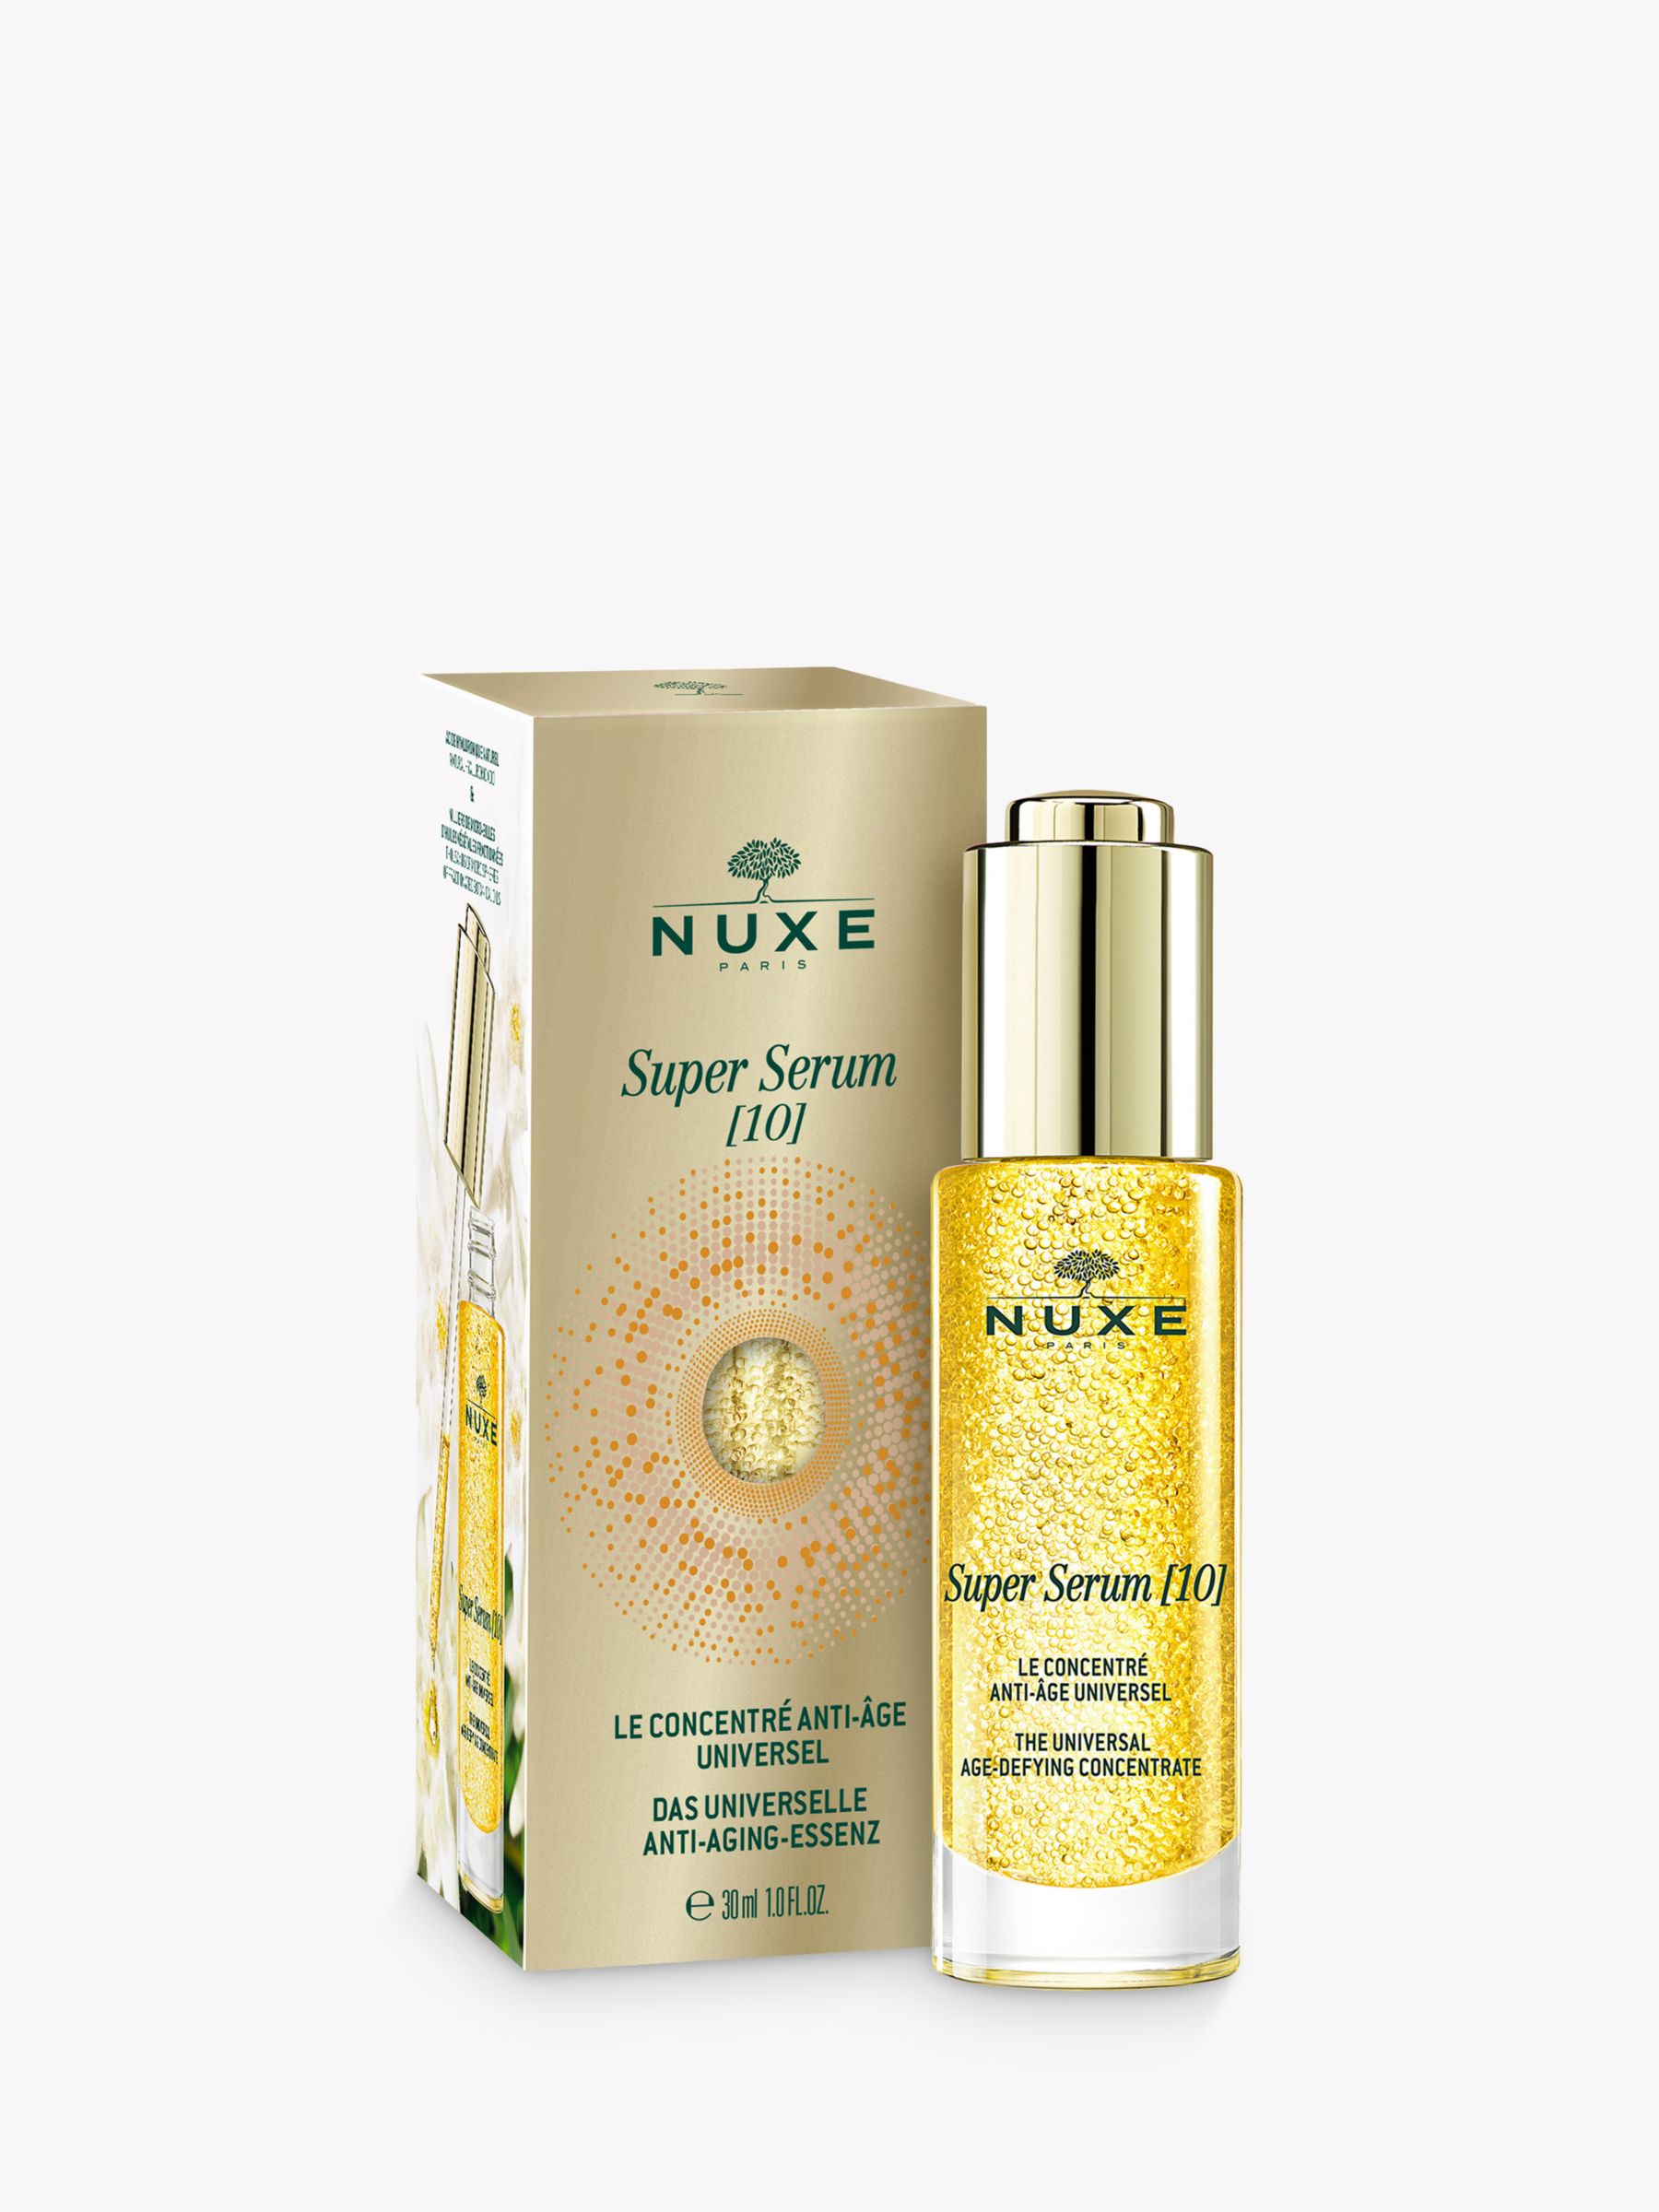 NUXE Super Super Serum (10) The Universal Anti-Ageing Concentrate, 30ml 3